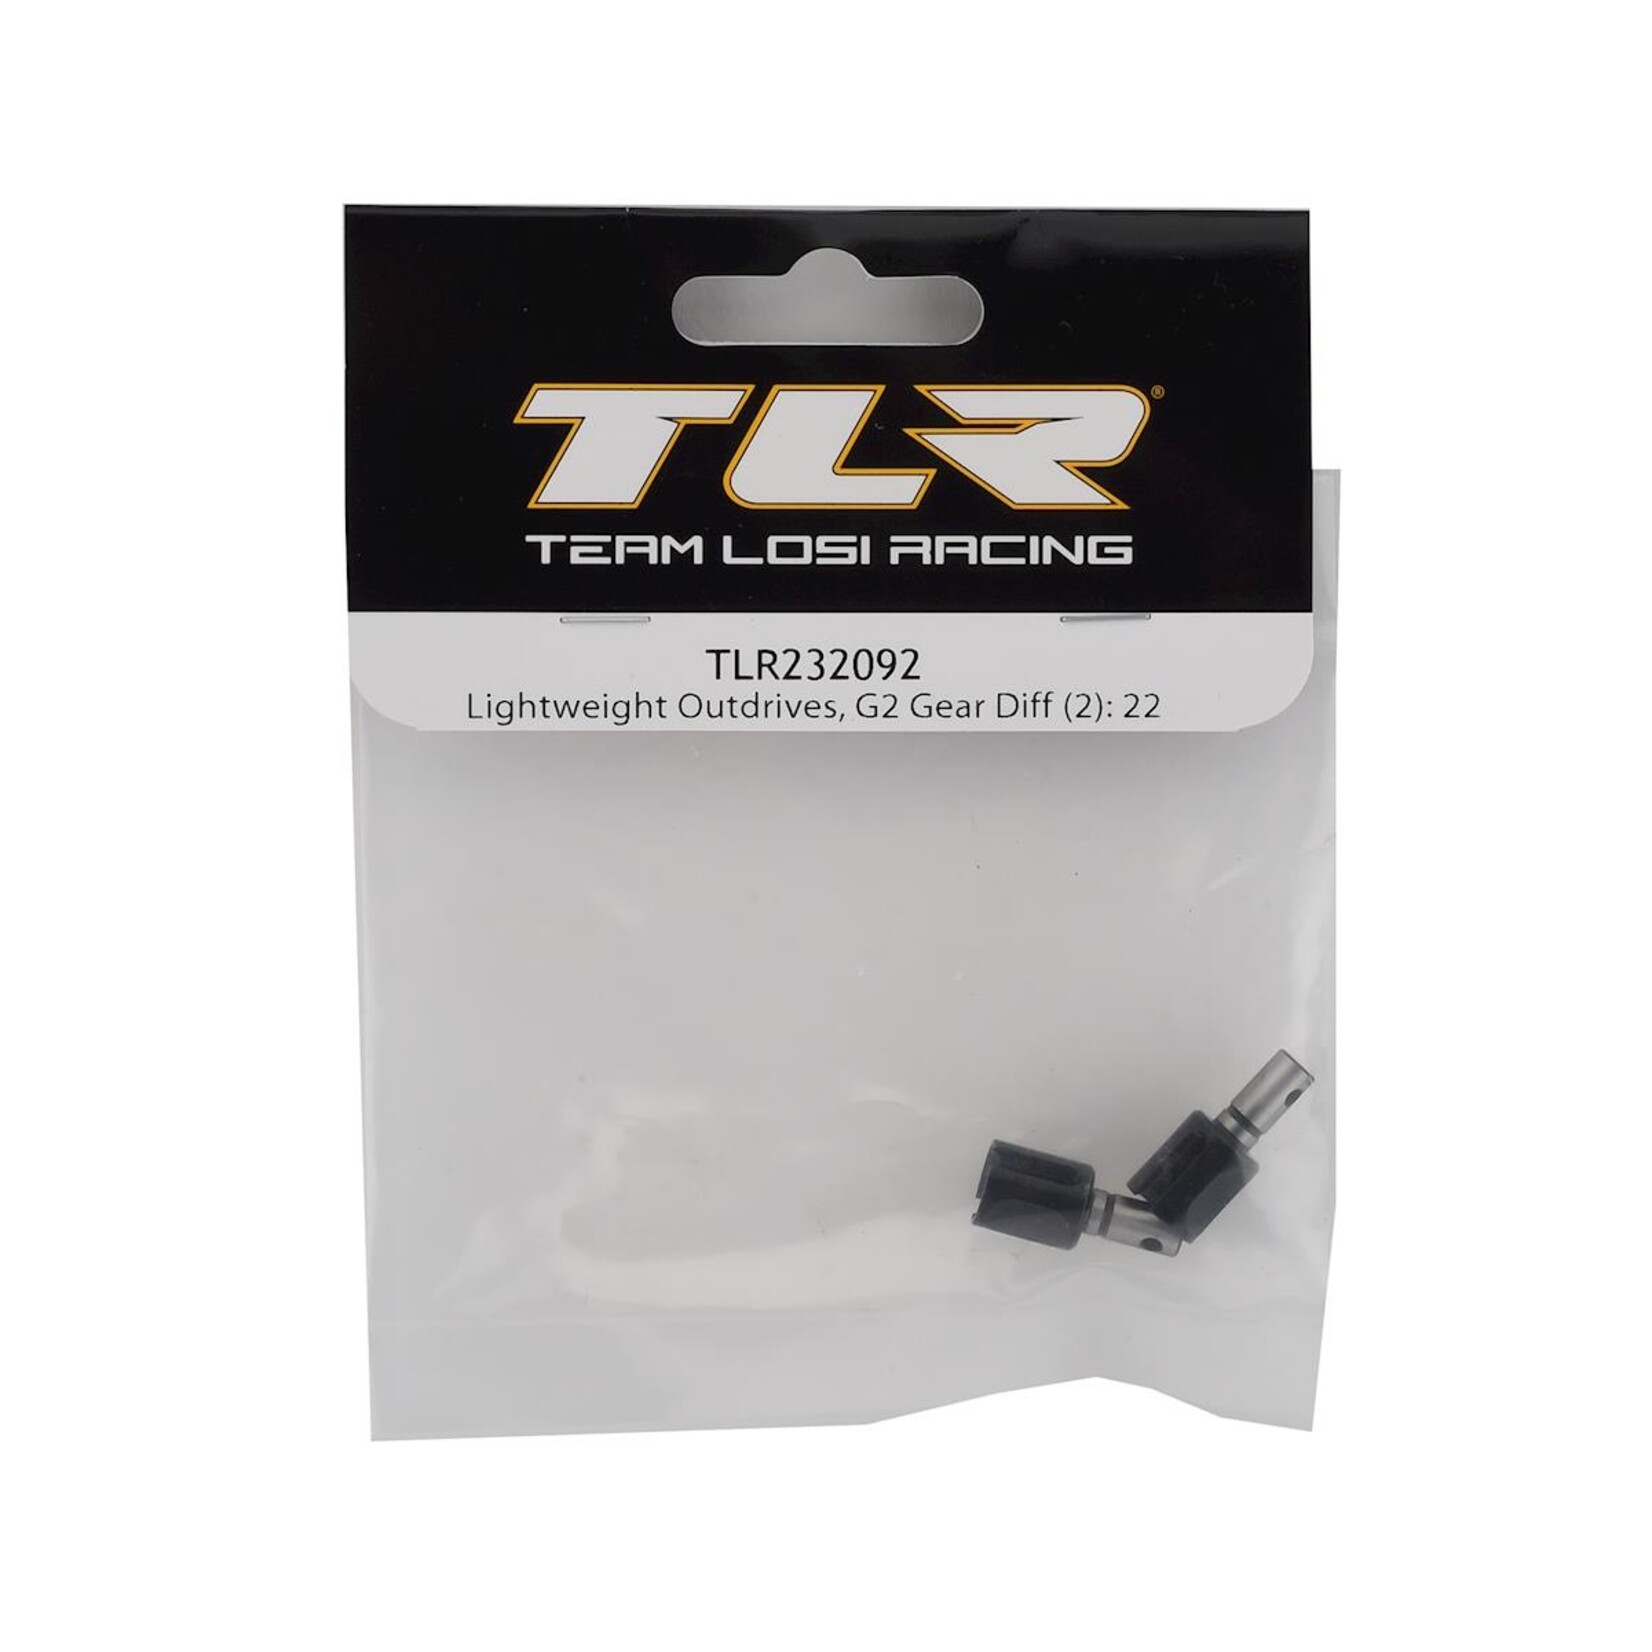 TLR Team Losi Racing G2 Gear Differential Lightweight Outdrives (2) #TLR232092